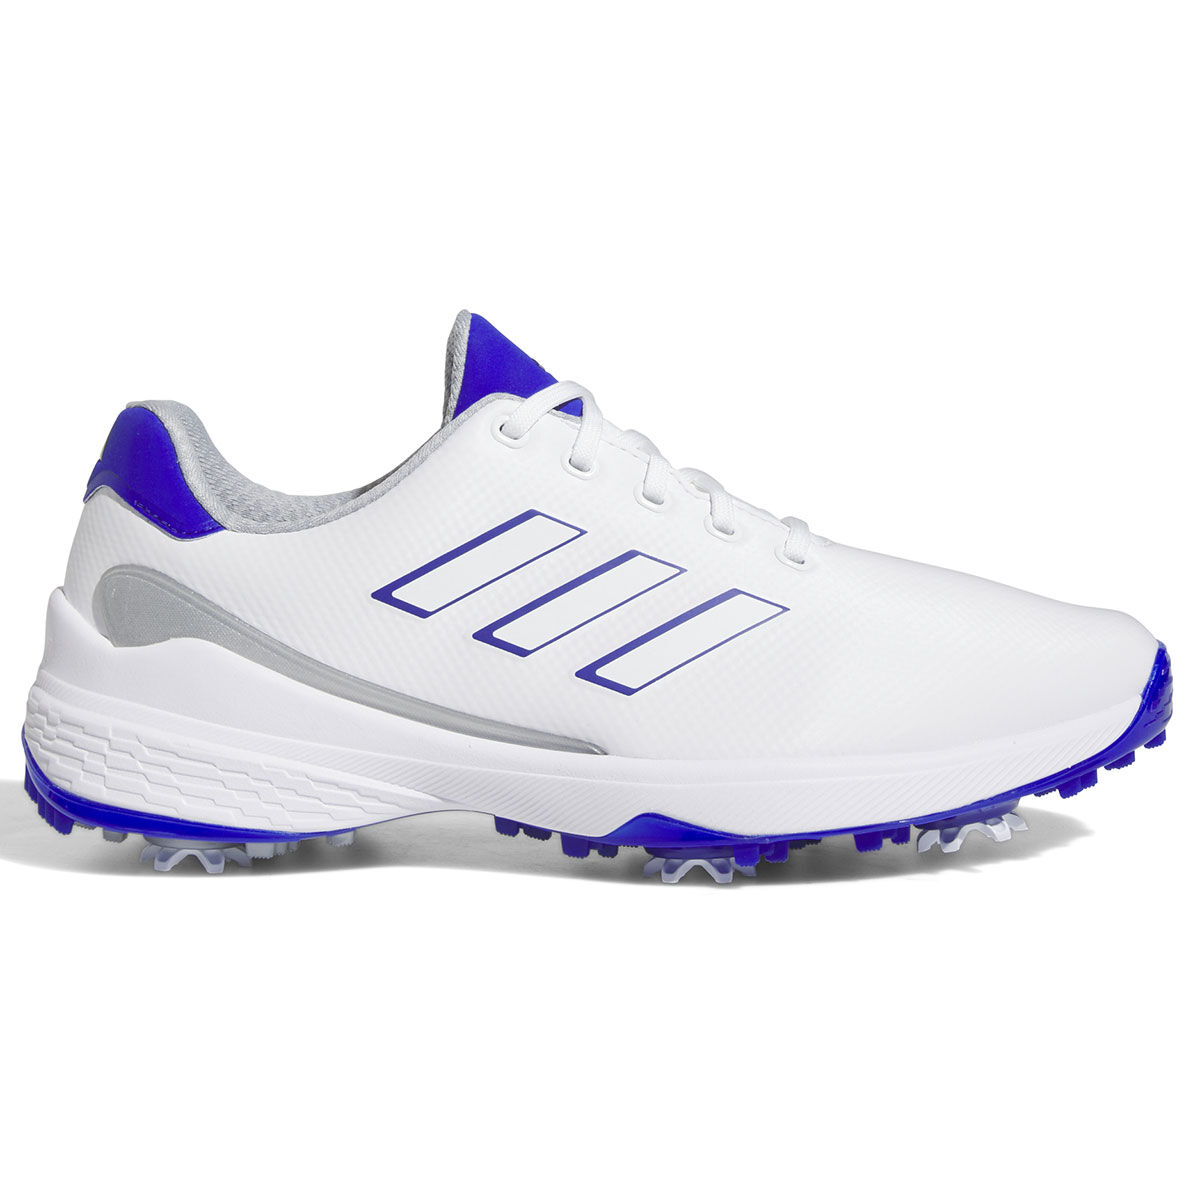 adidas Men’s ZG23 Waterproof Spiked Golf Shoes, Mens, White/blue fusion/lucid blue, 7 | American Golf